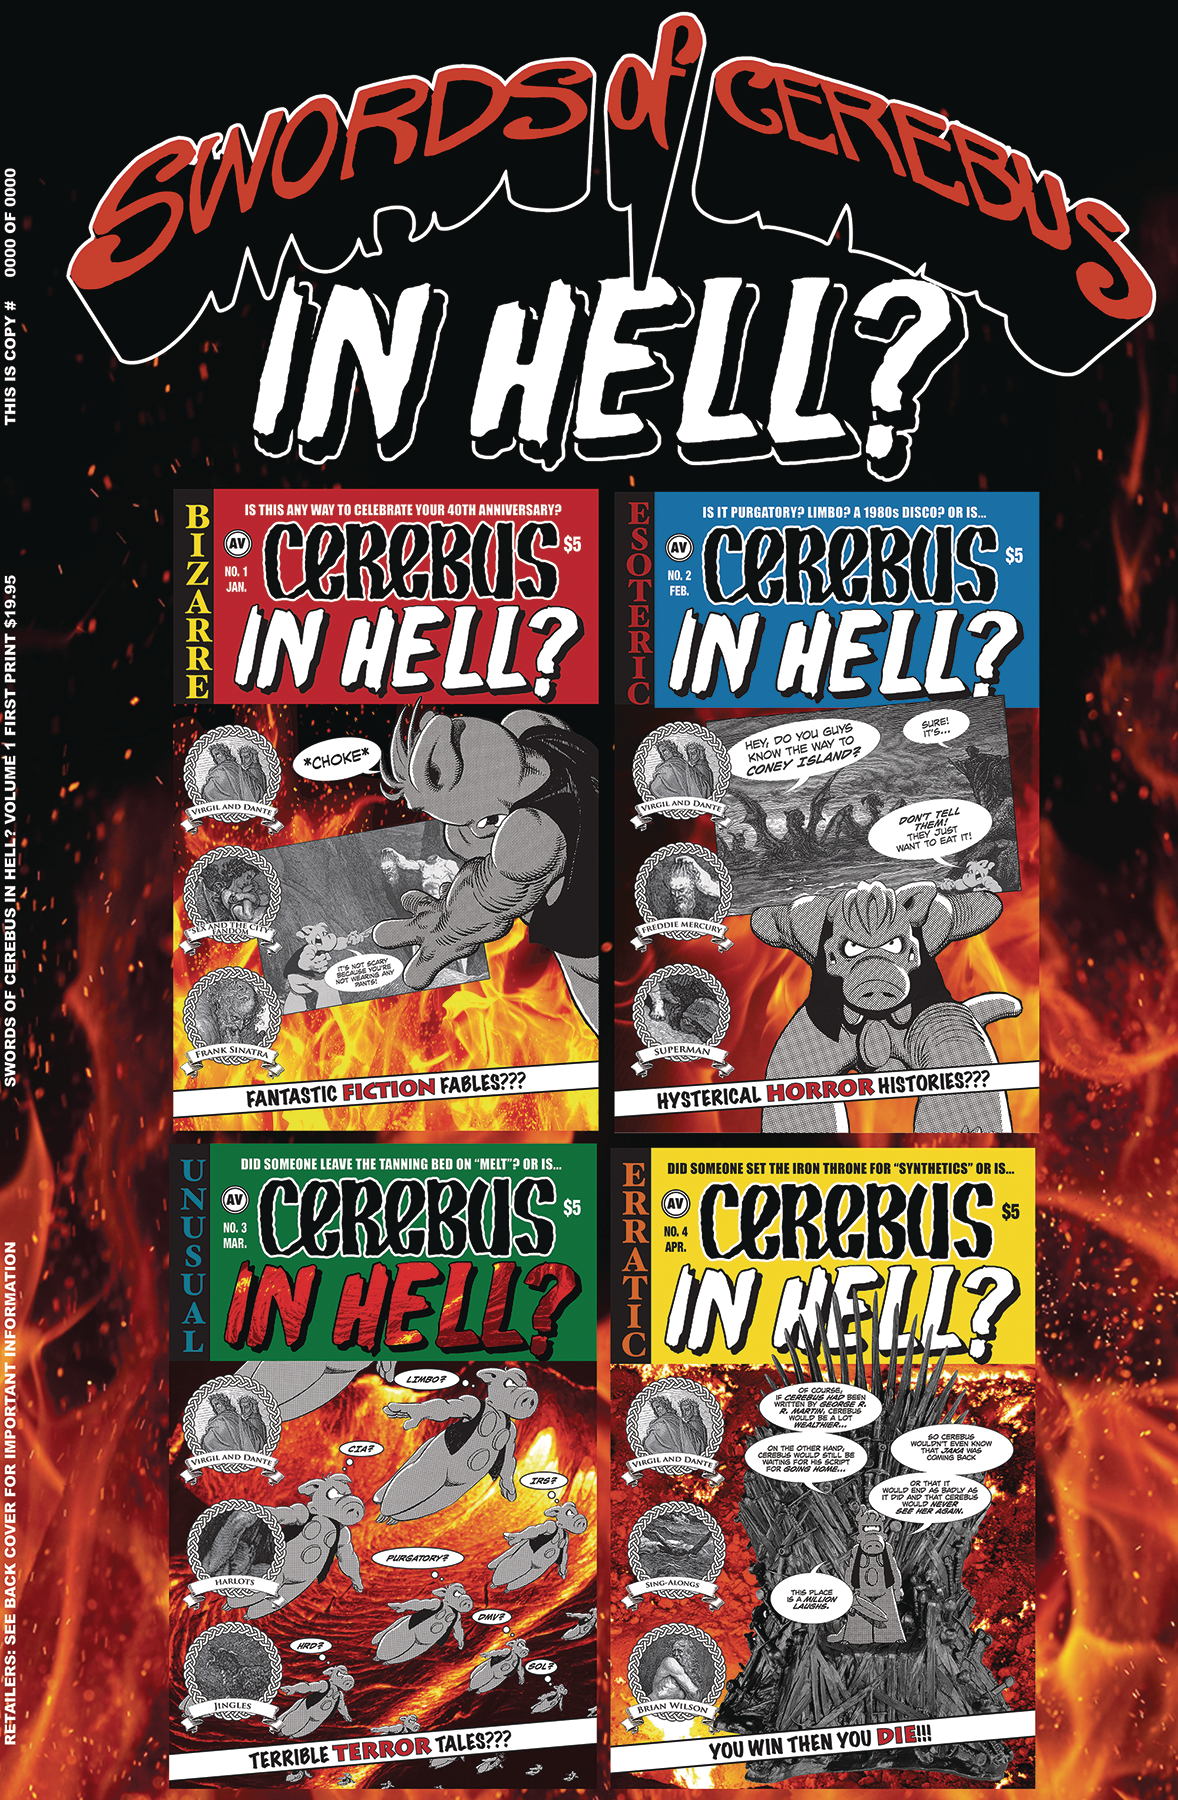 Swords of Cerebus In Hell Graphic Novel Volume 1